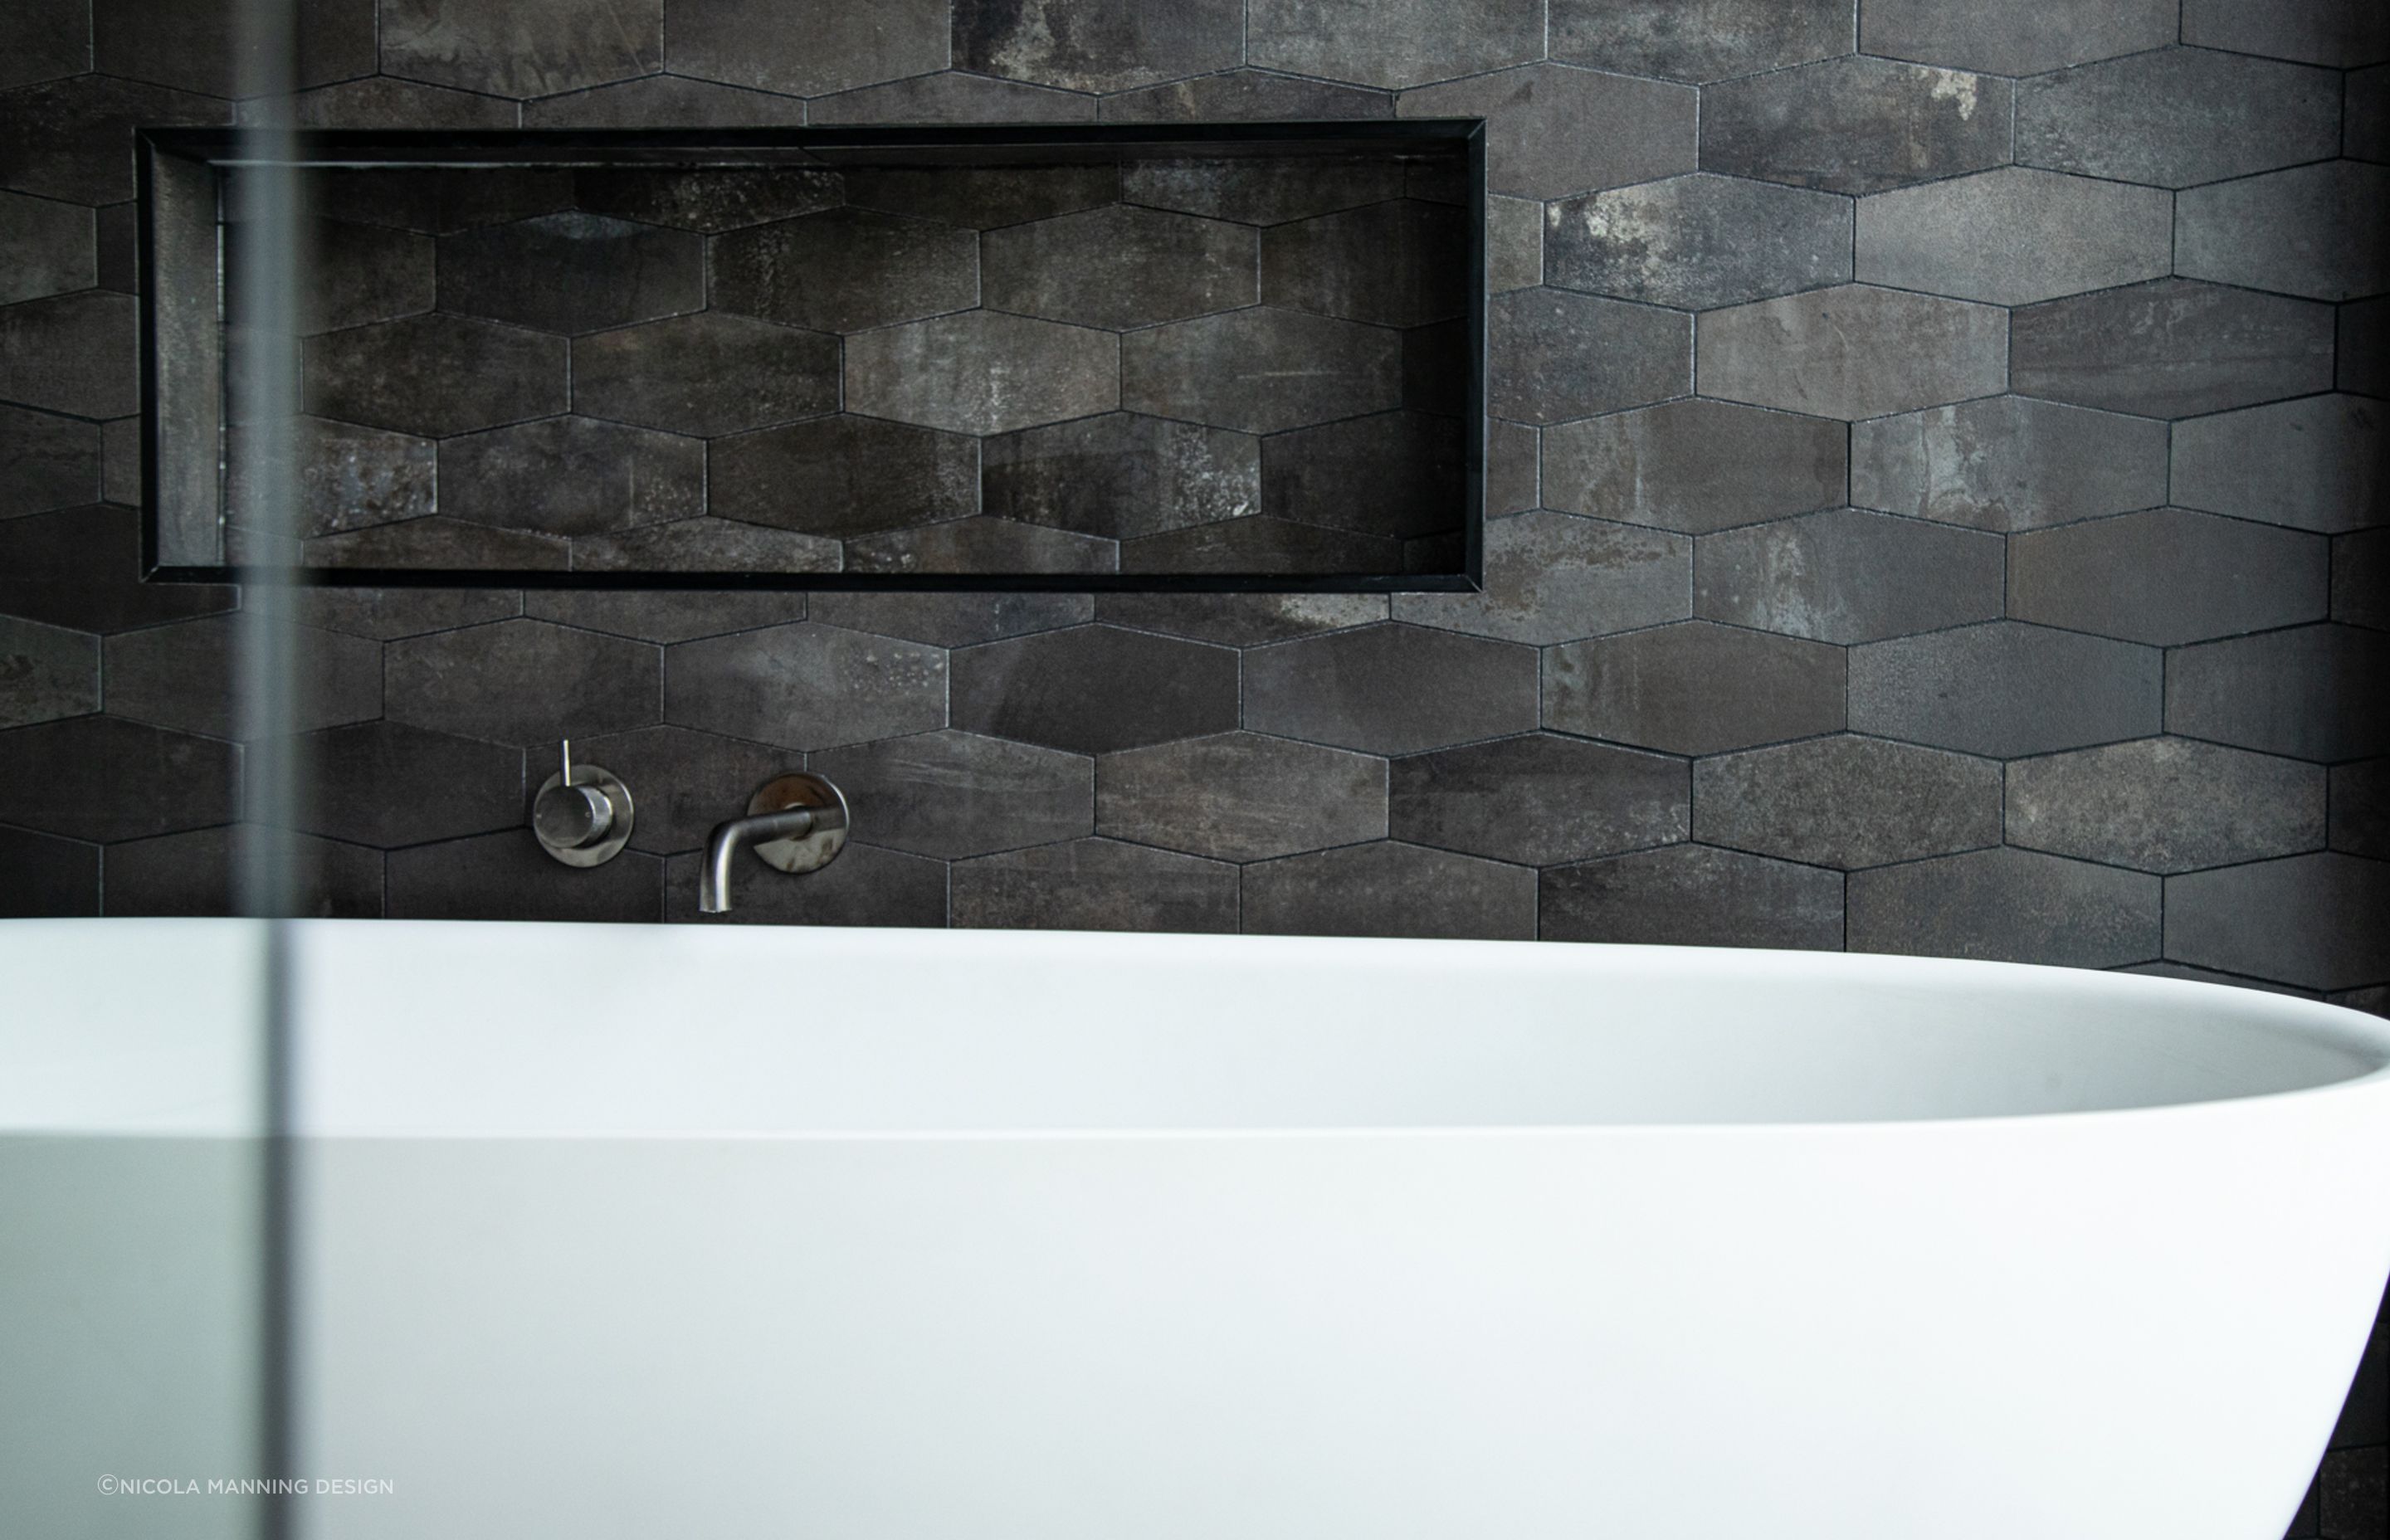 Elongated hexagons define the space around this tub in this inner city townhouse.